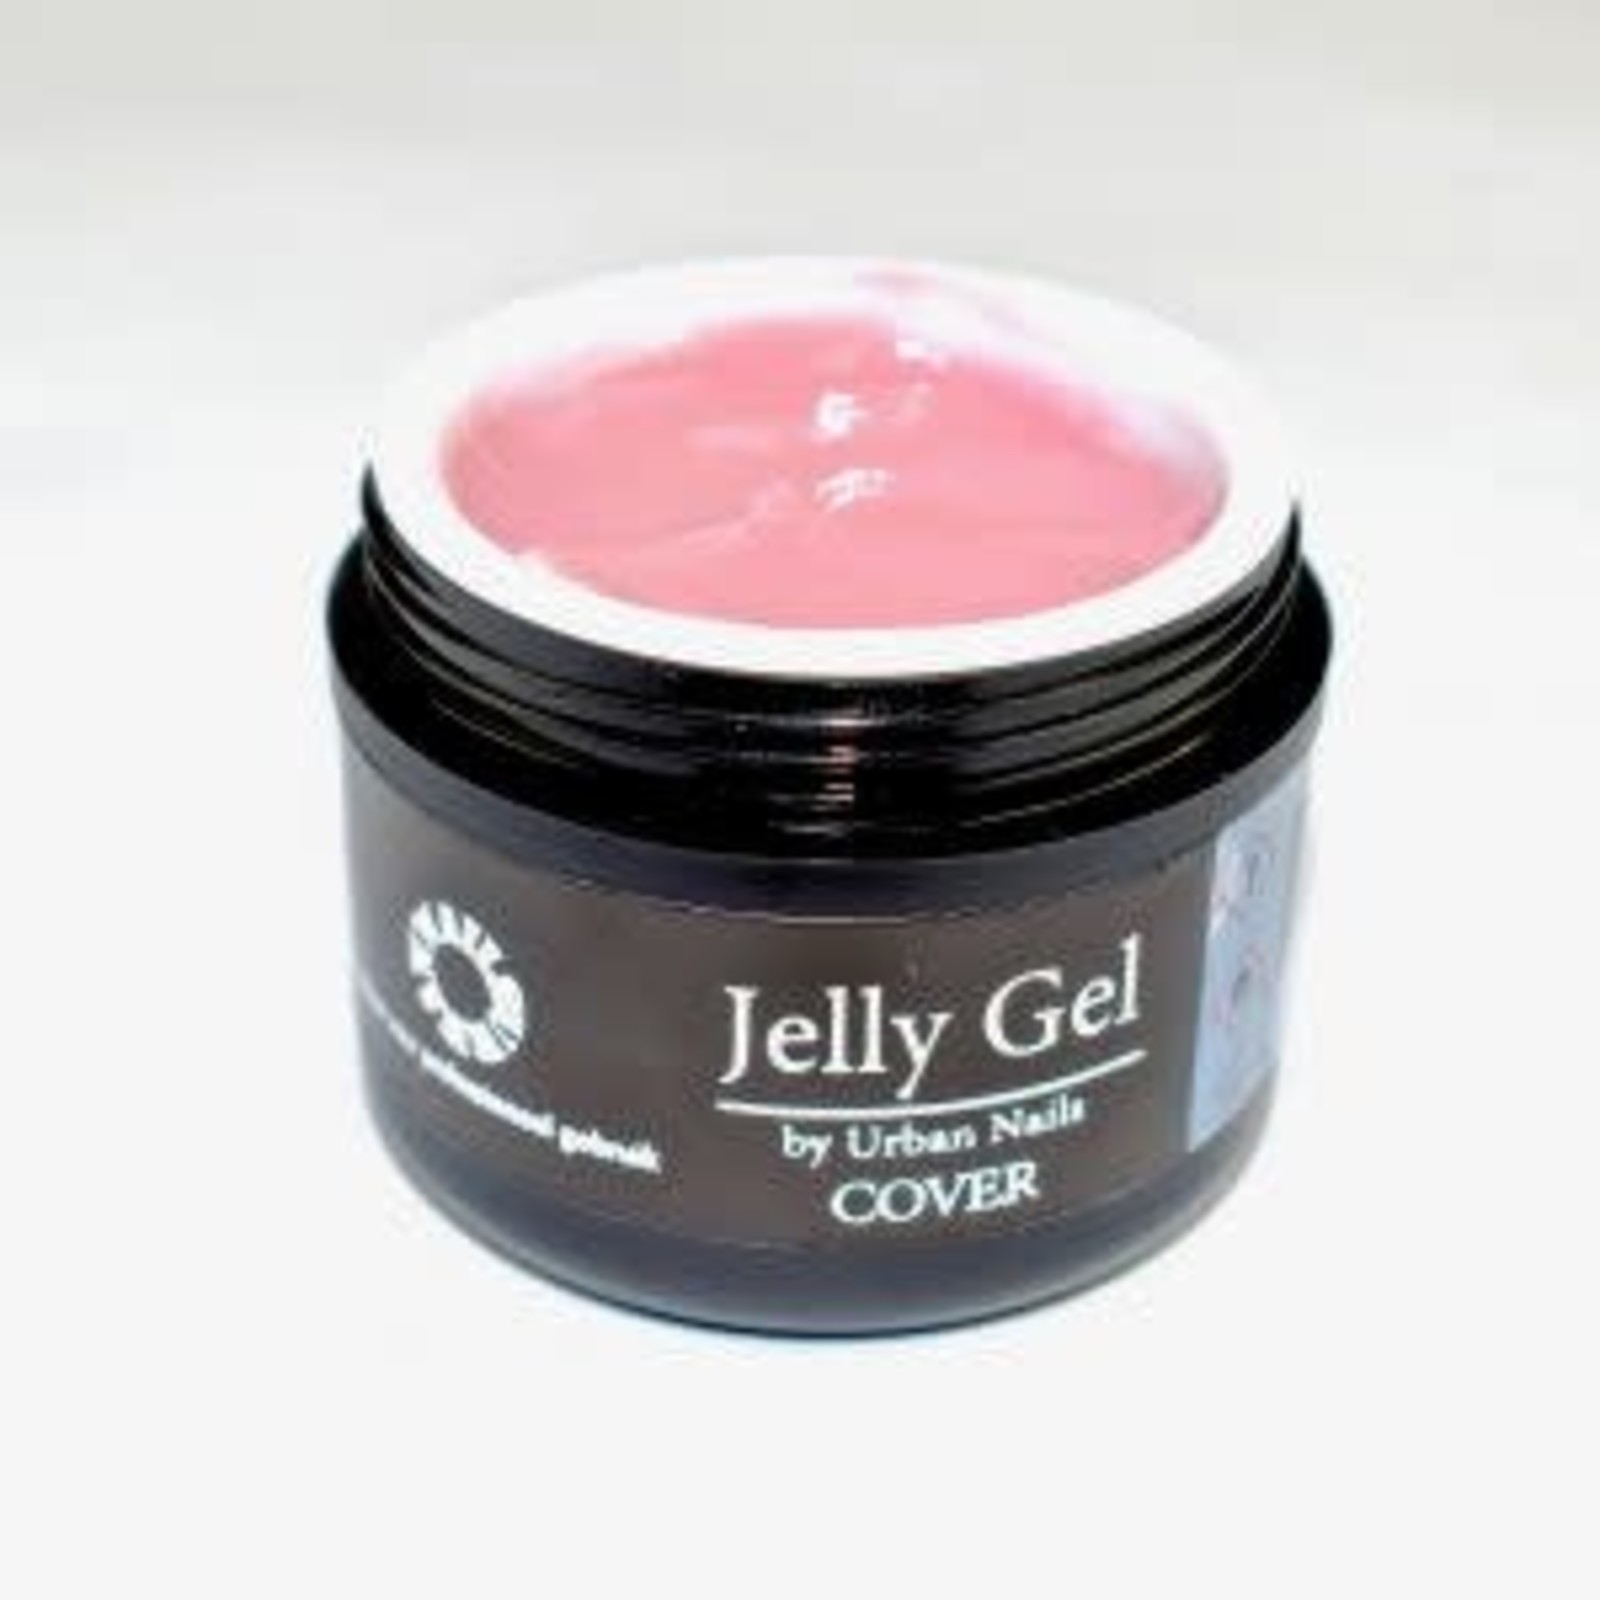 Urban nails Jelly gel cover 50 gr